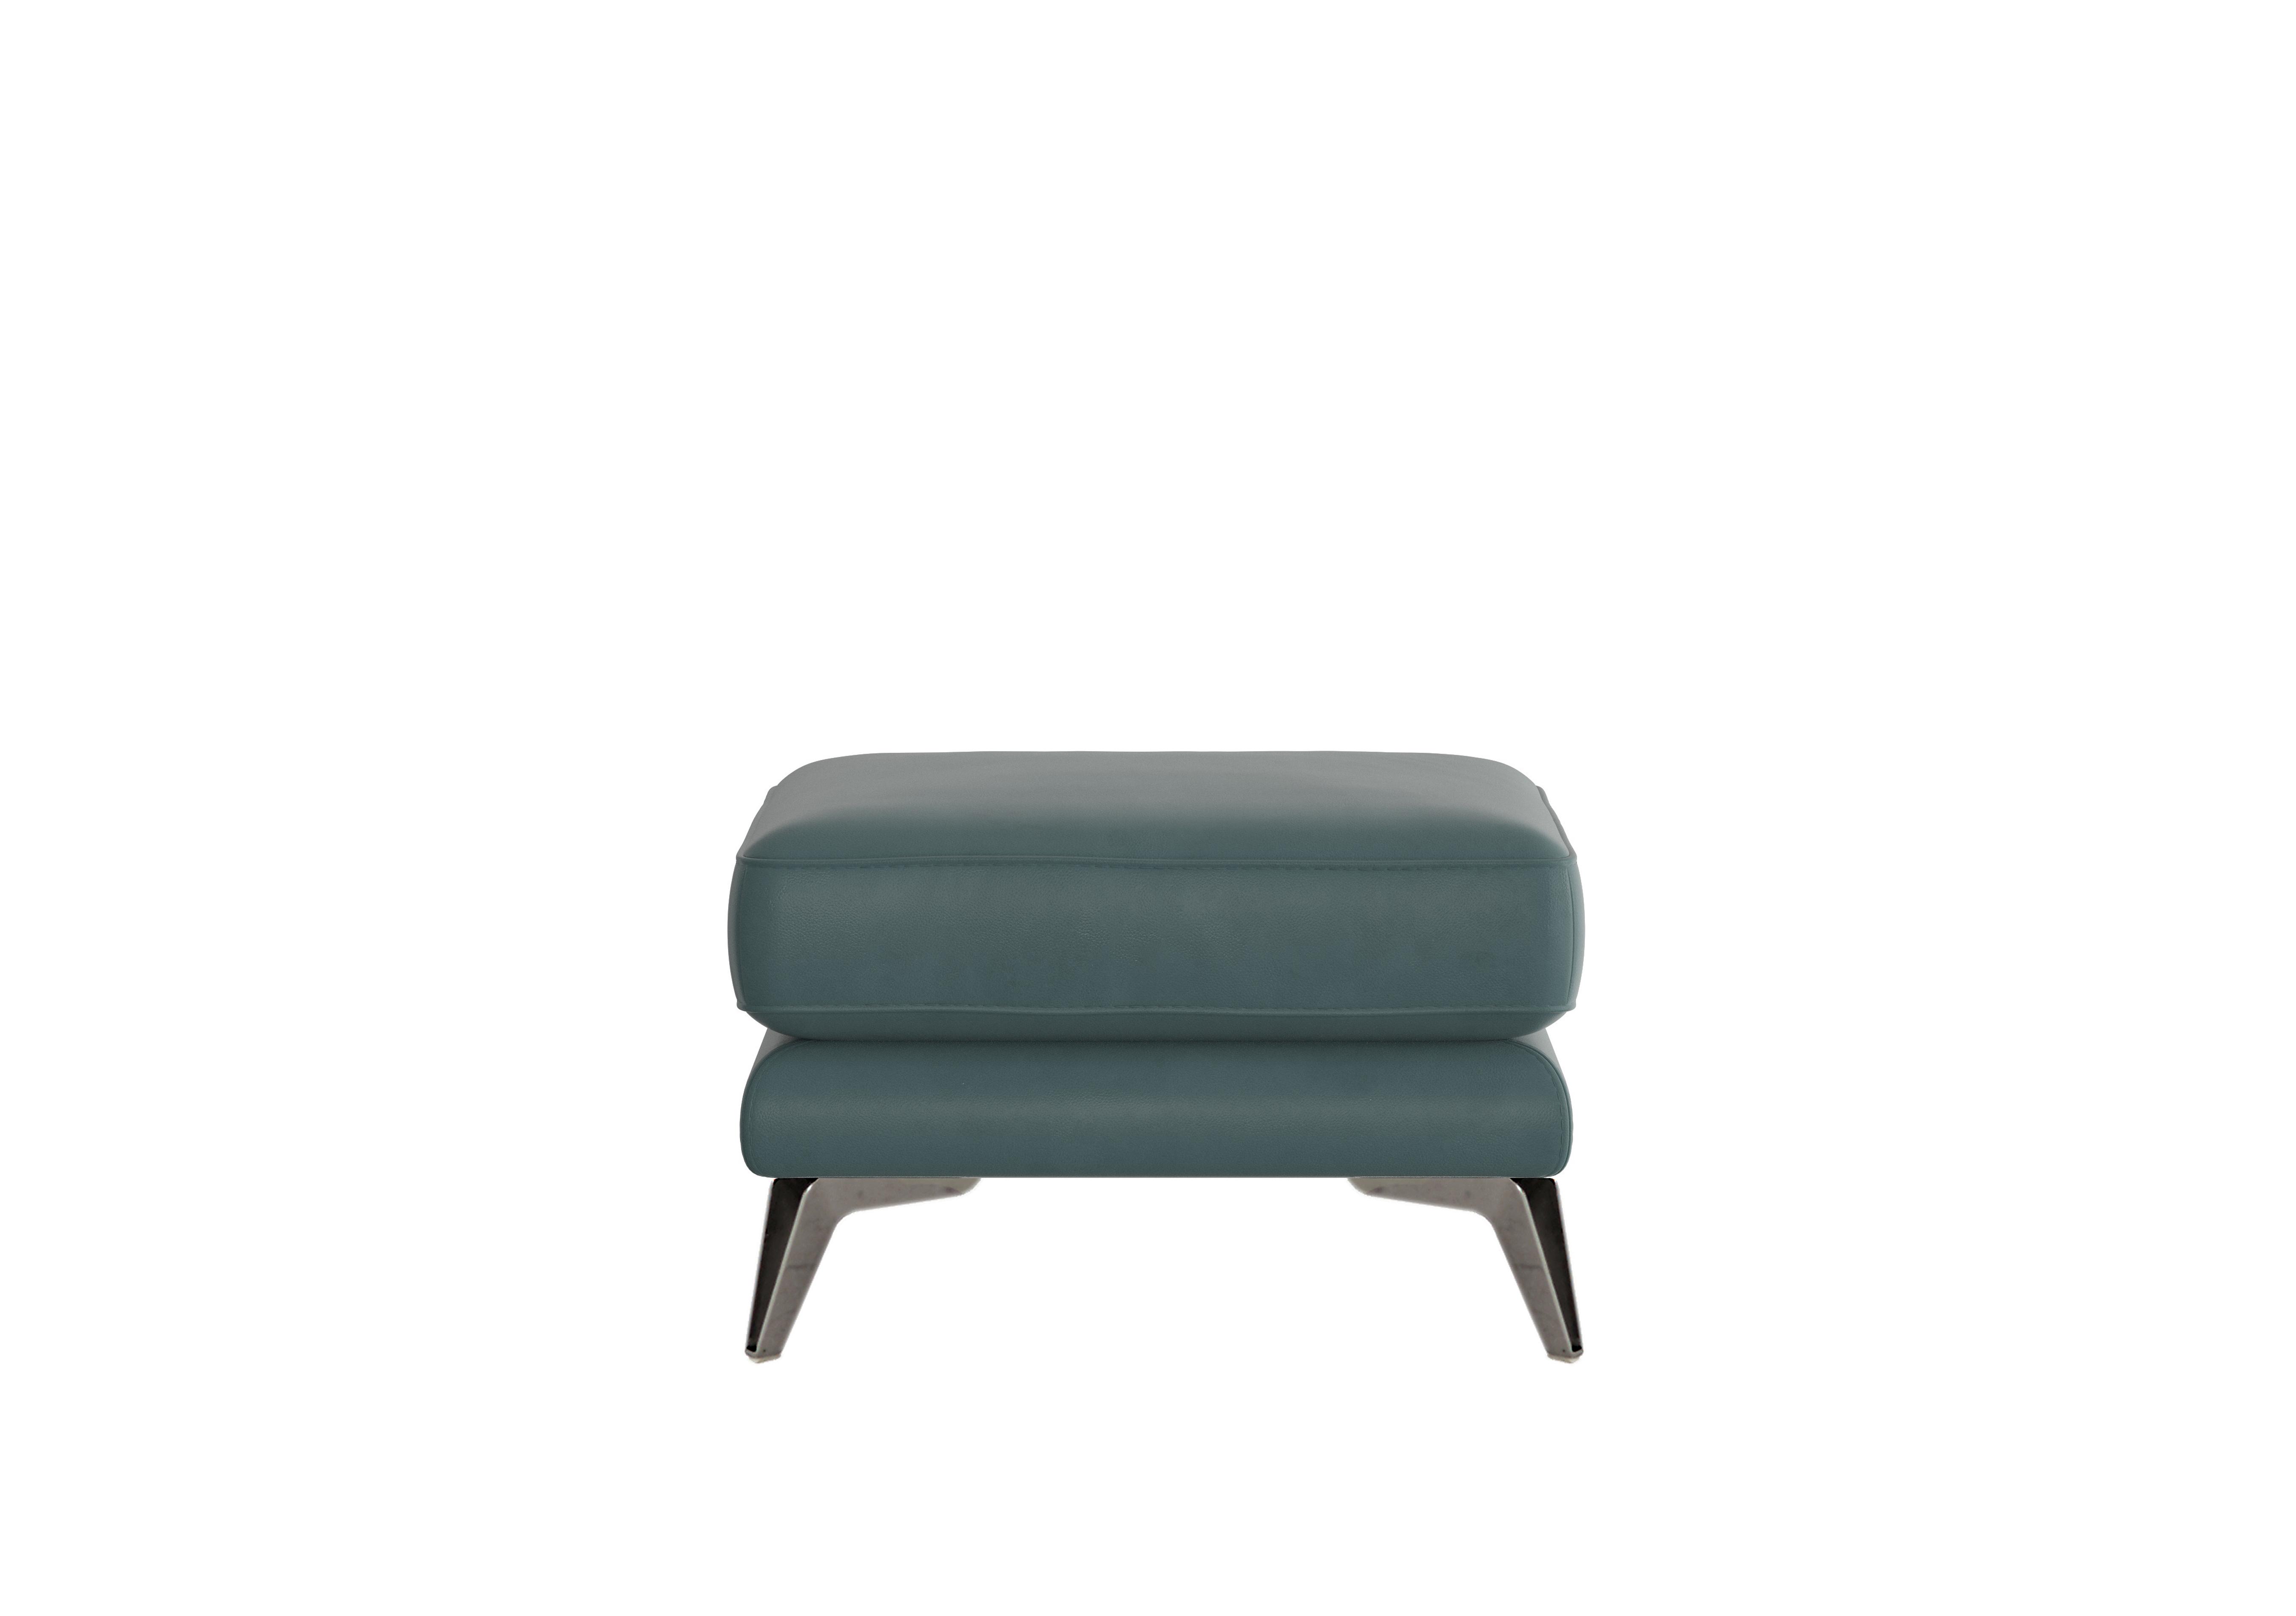 Contempo Leather Footstool in Bv-301e Lake Green on Furniture Village